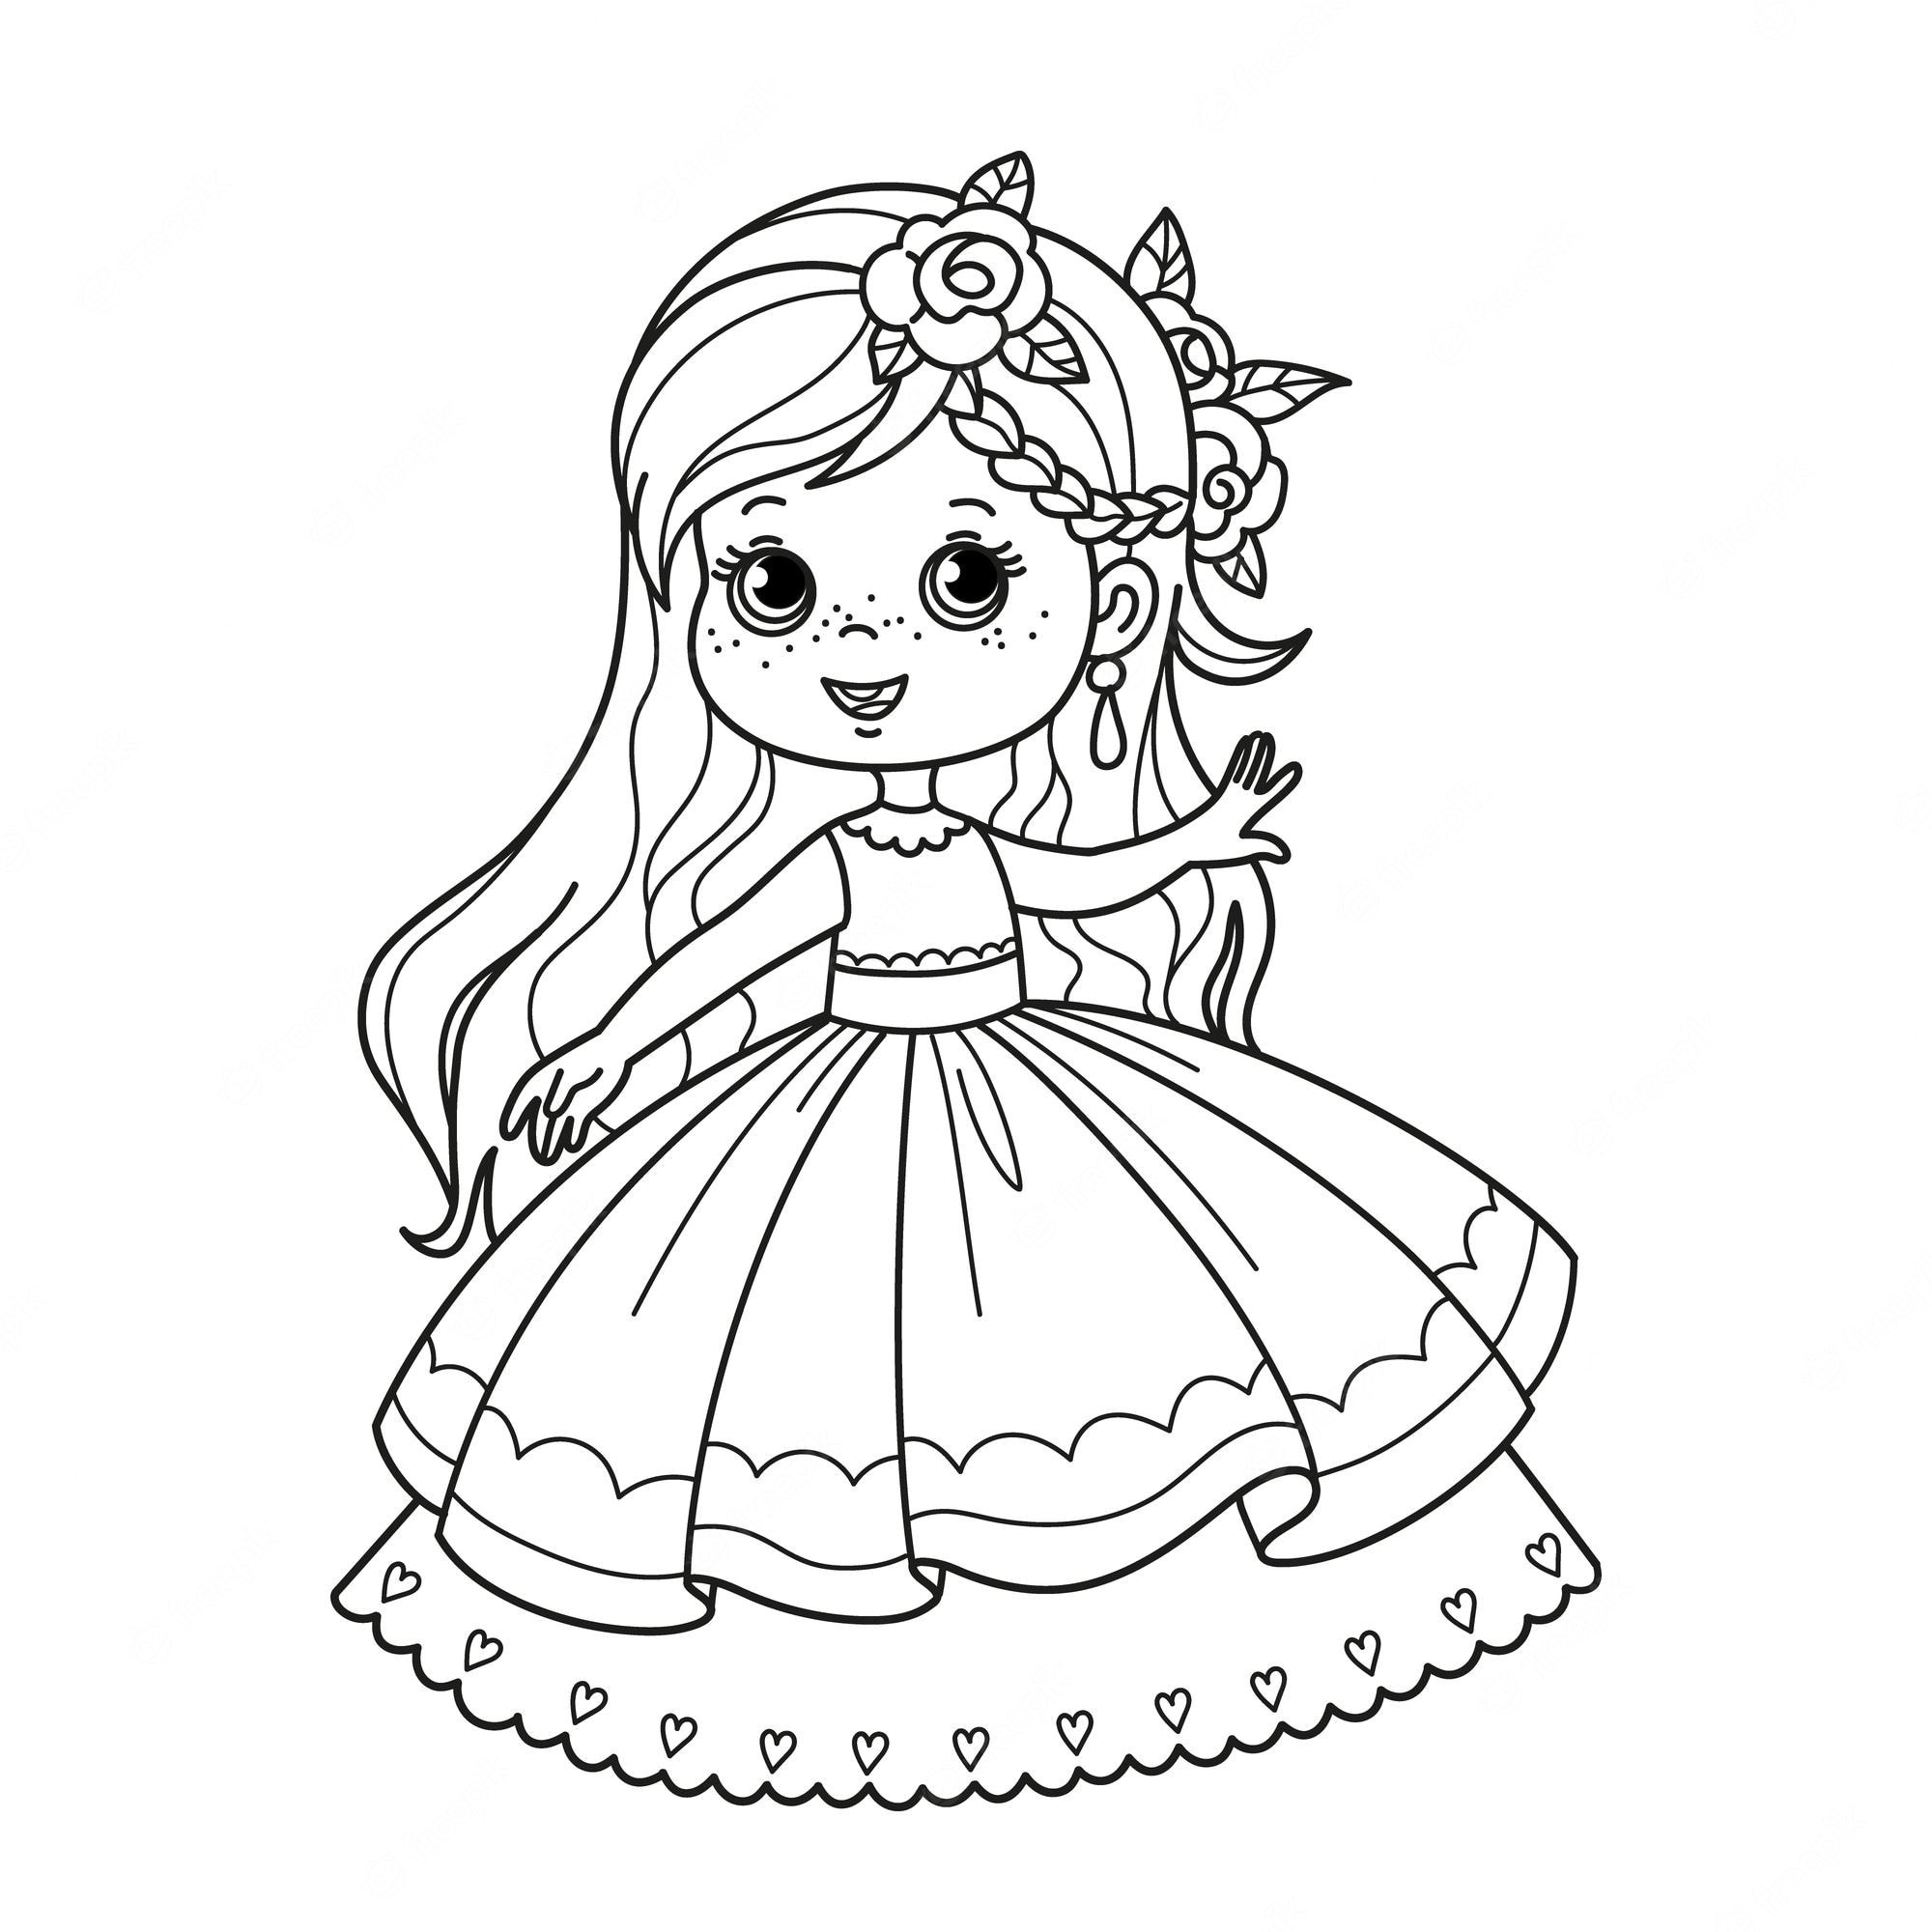 Premium Vector | Cartoon character cute little princess in a beautiful dress  coloring page for children vector black